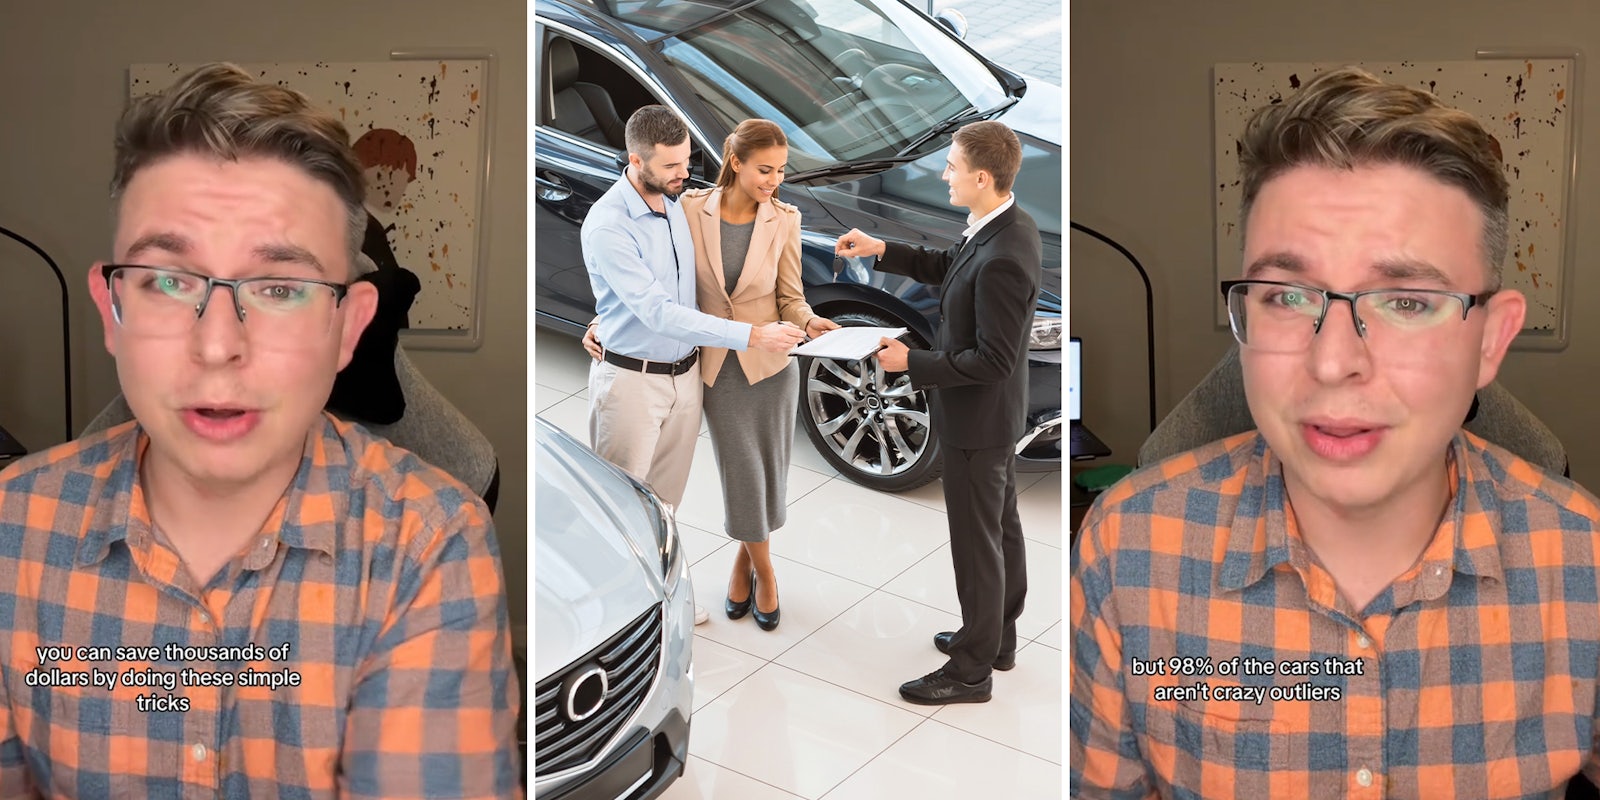 Car dealership expert shares how to negotiate the best deal—without having to step foot in a dealership